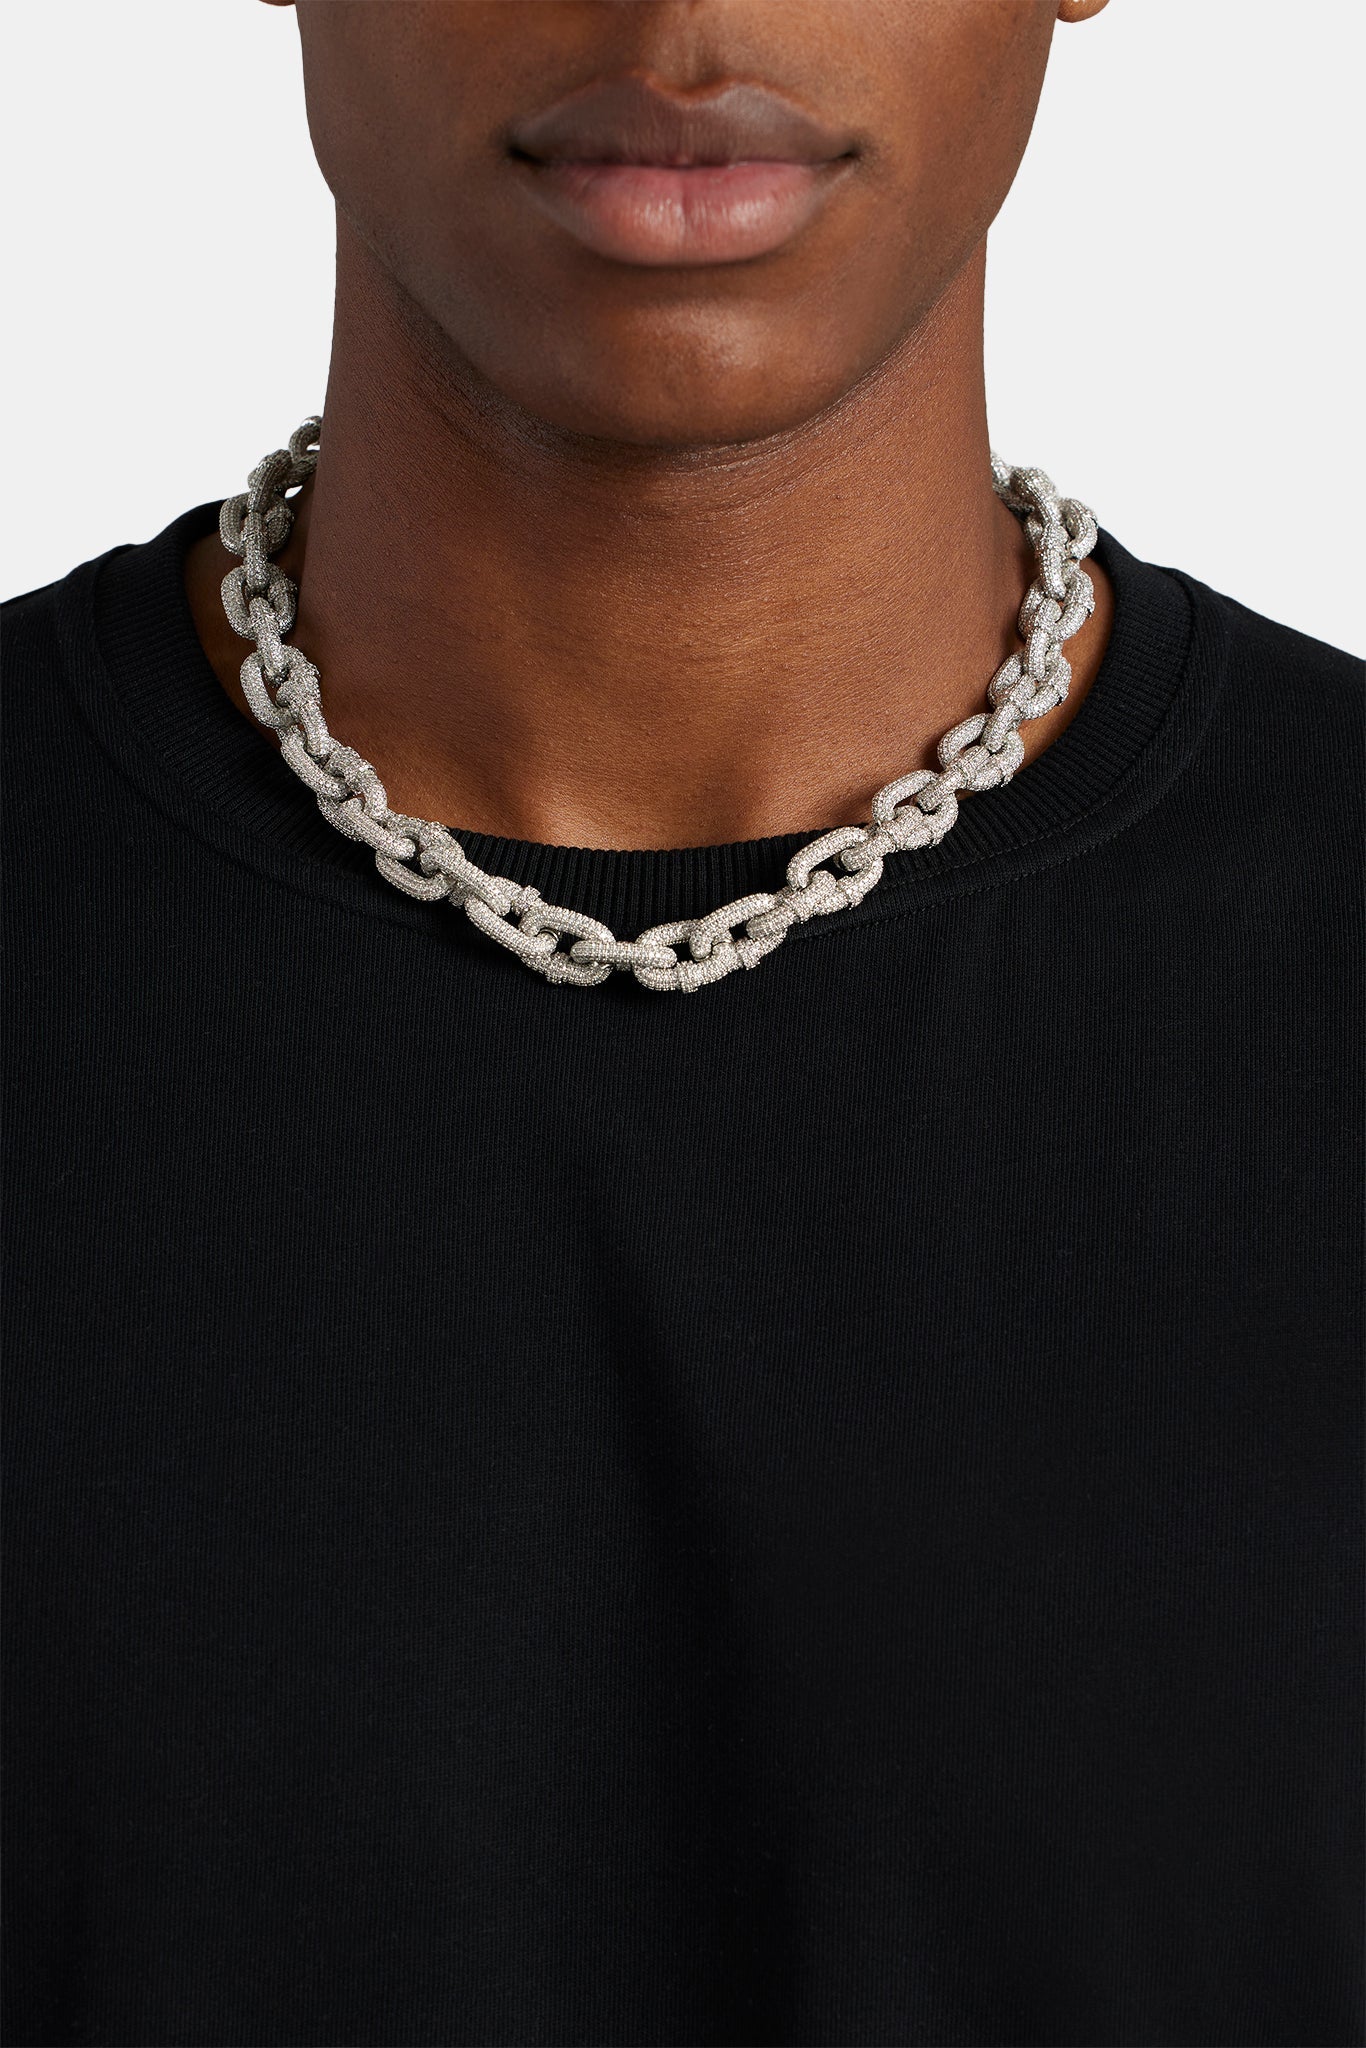 14mm Iced Chunky Link Pave Chain - White Gold – Zotic